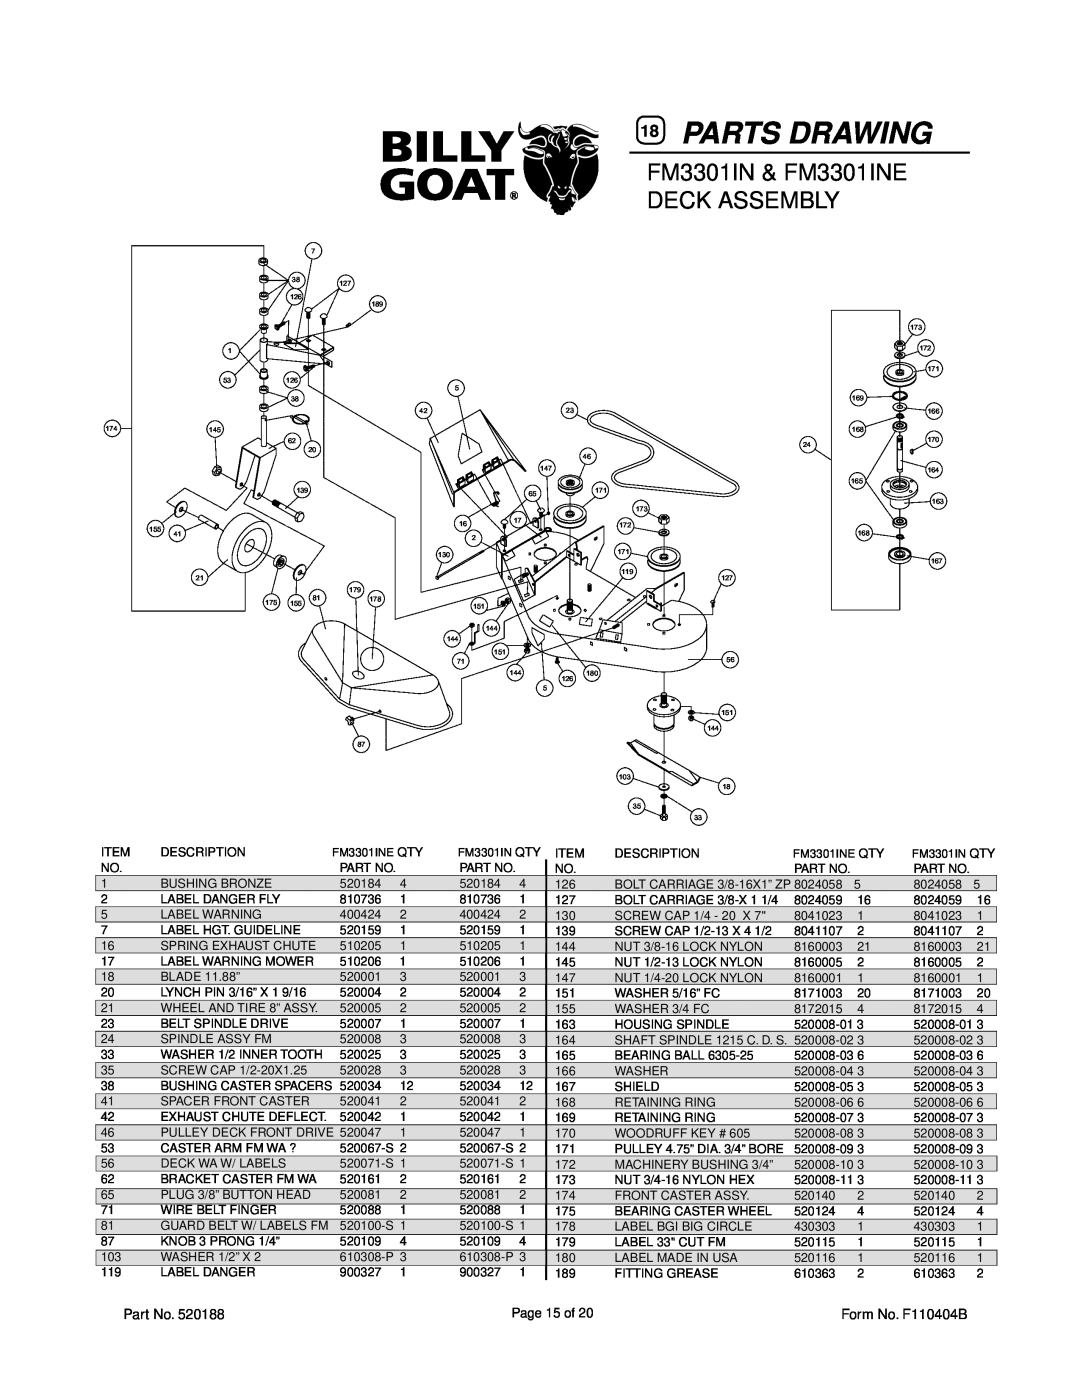 Billy Goat FM3301IN, FM3301INE owner manual Parts Drawing, FM3301IN & FM3301INE DECK ASSEMBLY 